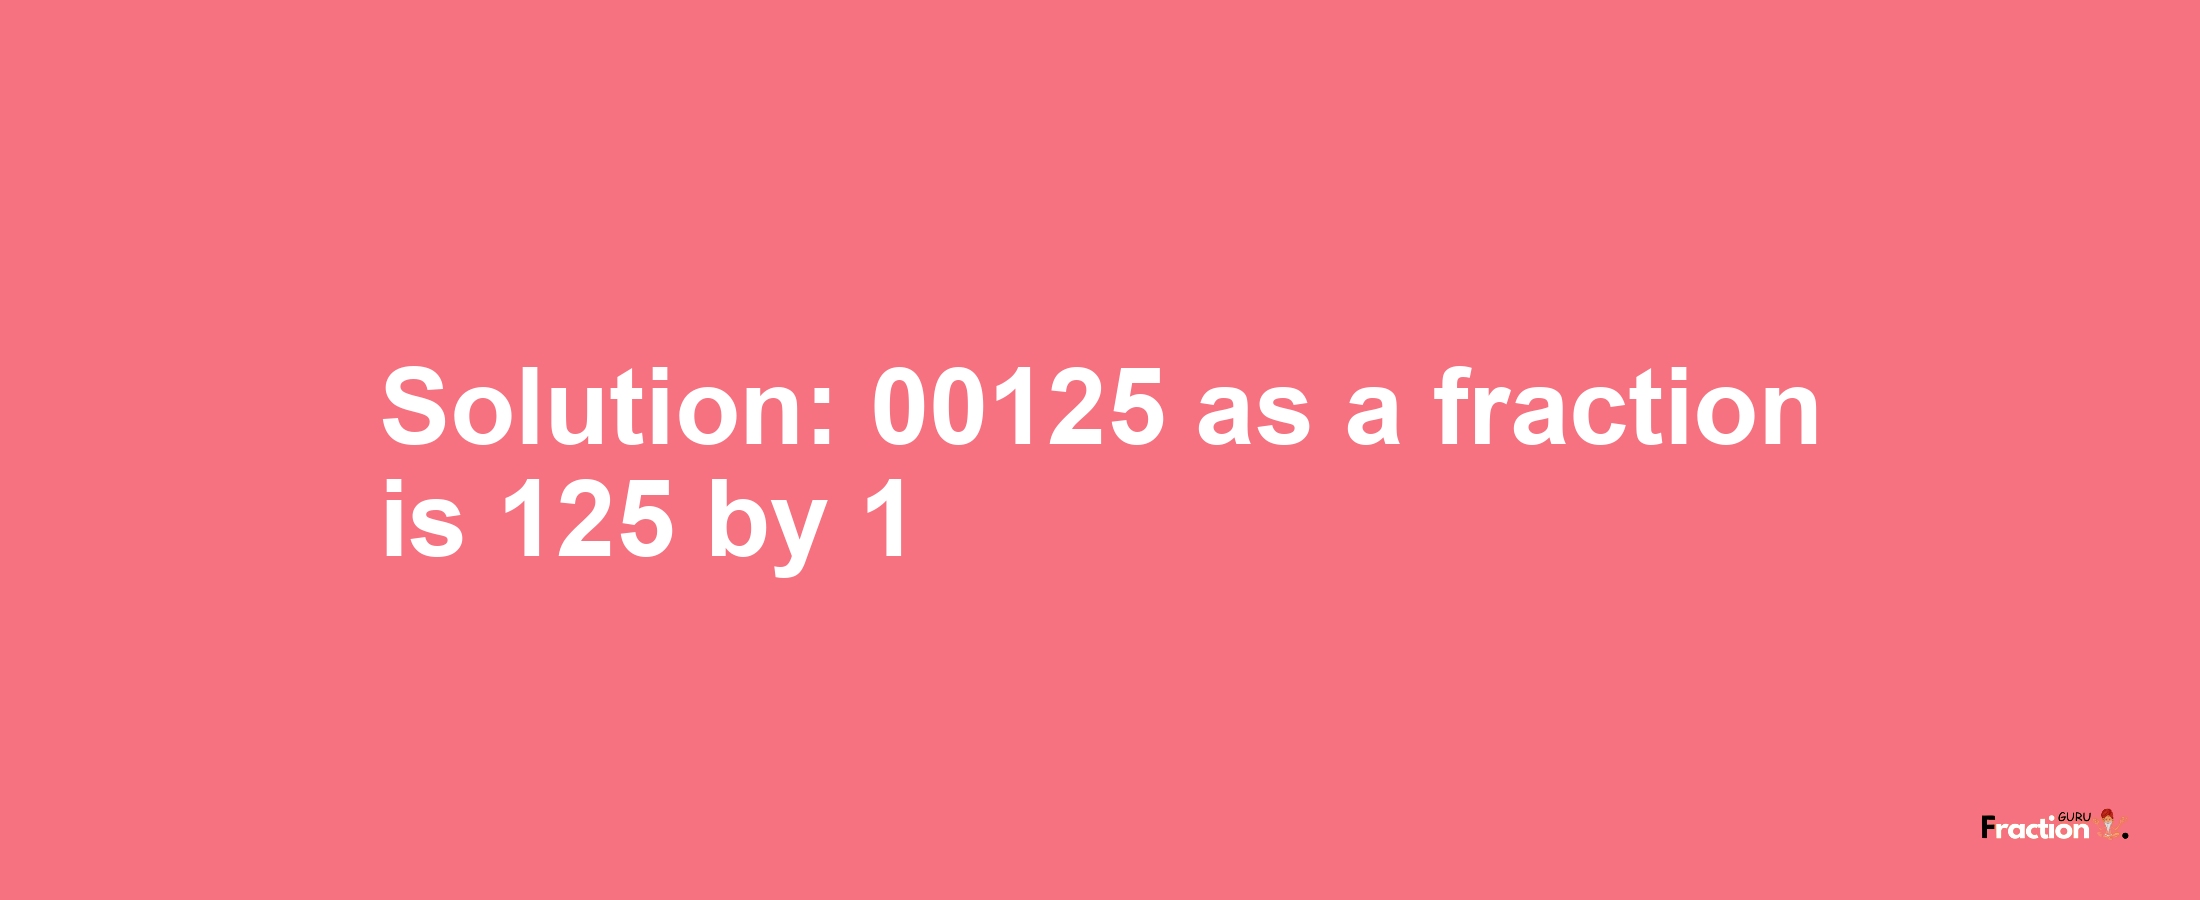 Solution:00125 as a fraction is 125/1